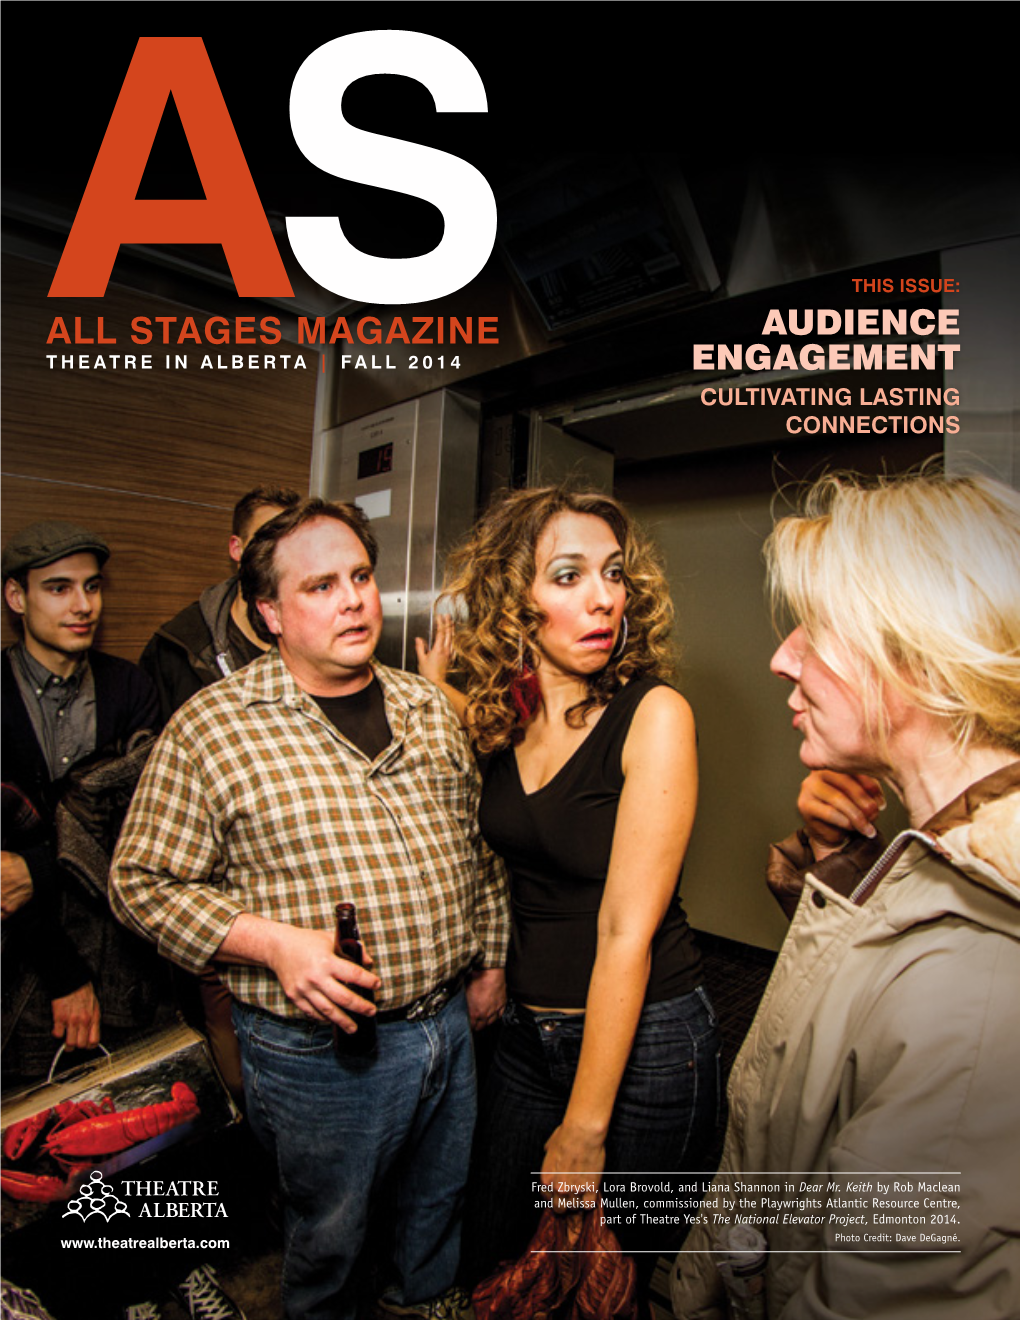 All Stages Magazine Audience Theatre in Alberta | Fall 2014 Engagement Cultivating Lasting Connections